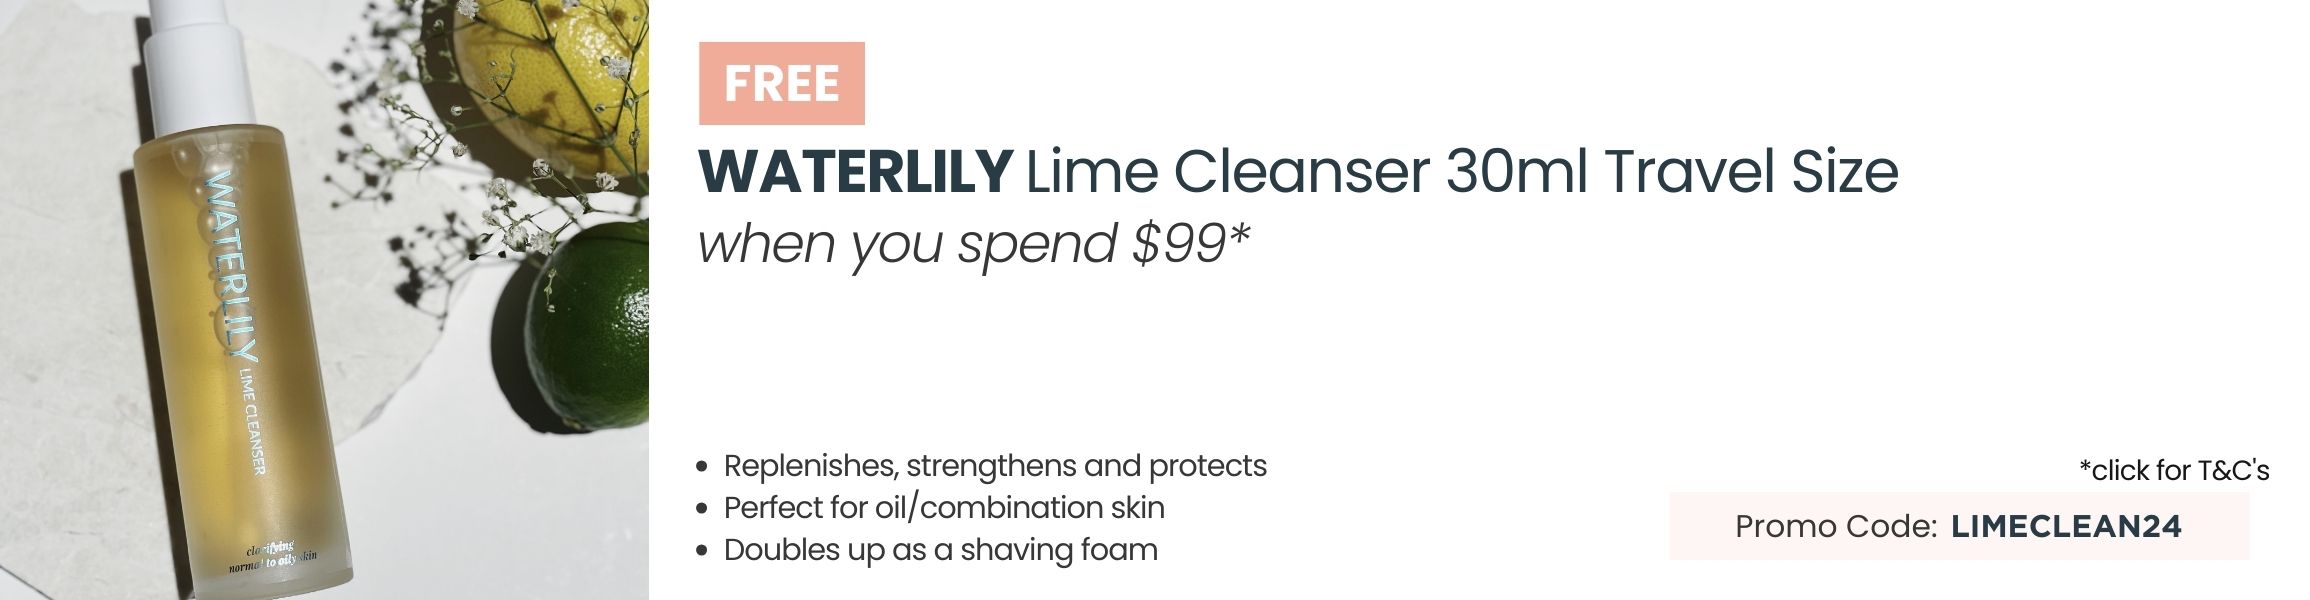 FREE Waterlily Lime Cleanser 30ml Travel Size when you spend $99. Promo Code: LIMECLEAN24.